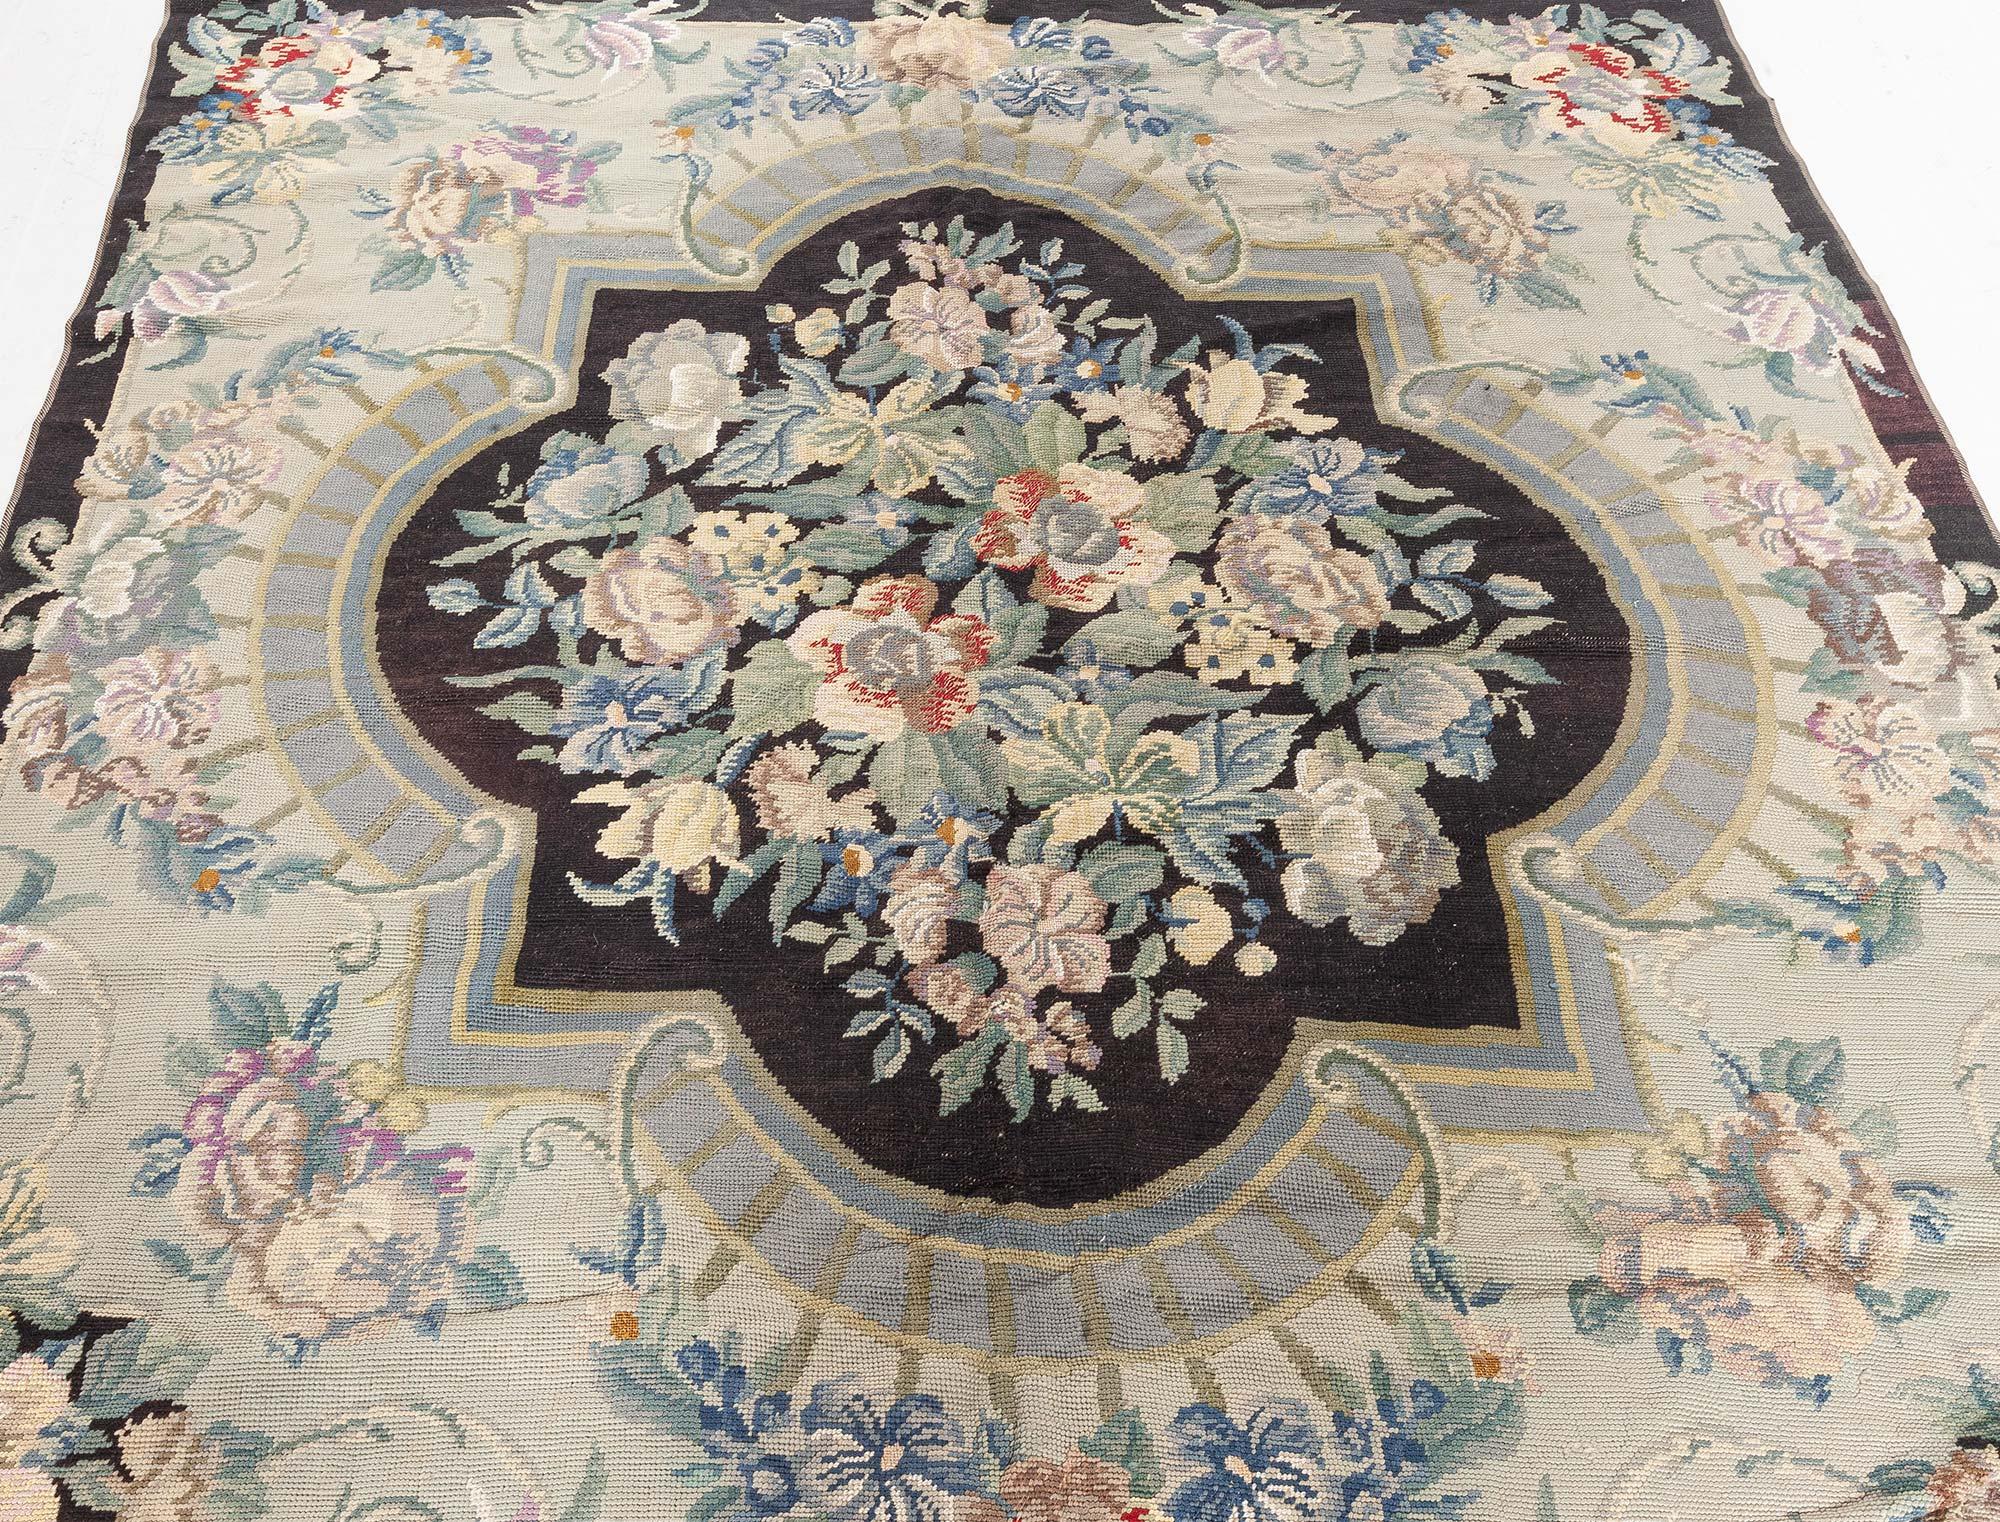 Early 20th Century English Needle Point Rug
Size: 4'8